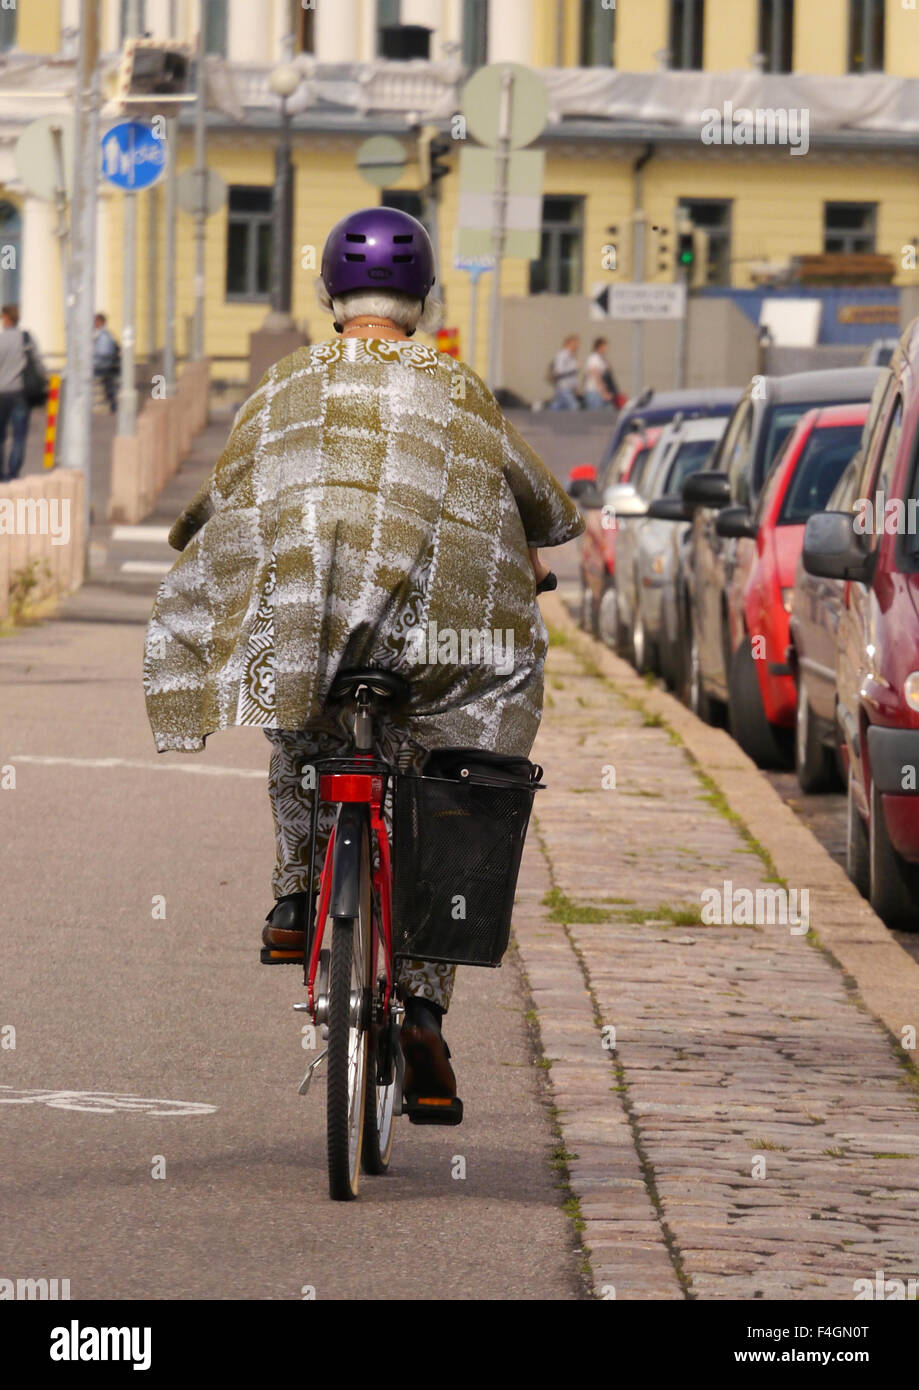 An eccentric looking woman on a bicycle wearing a purple cycling helmet and a shawl Stock Photo